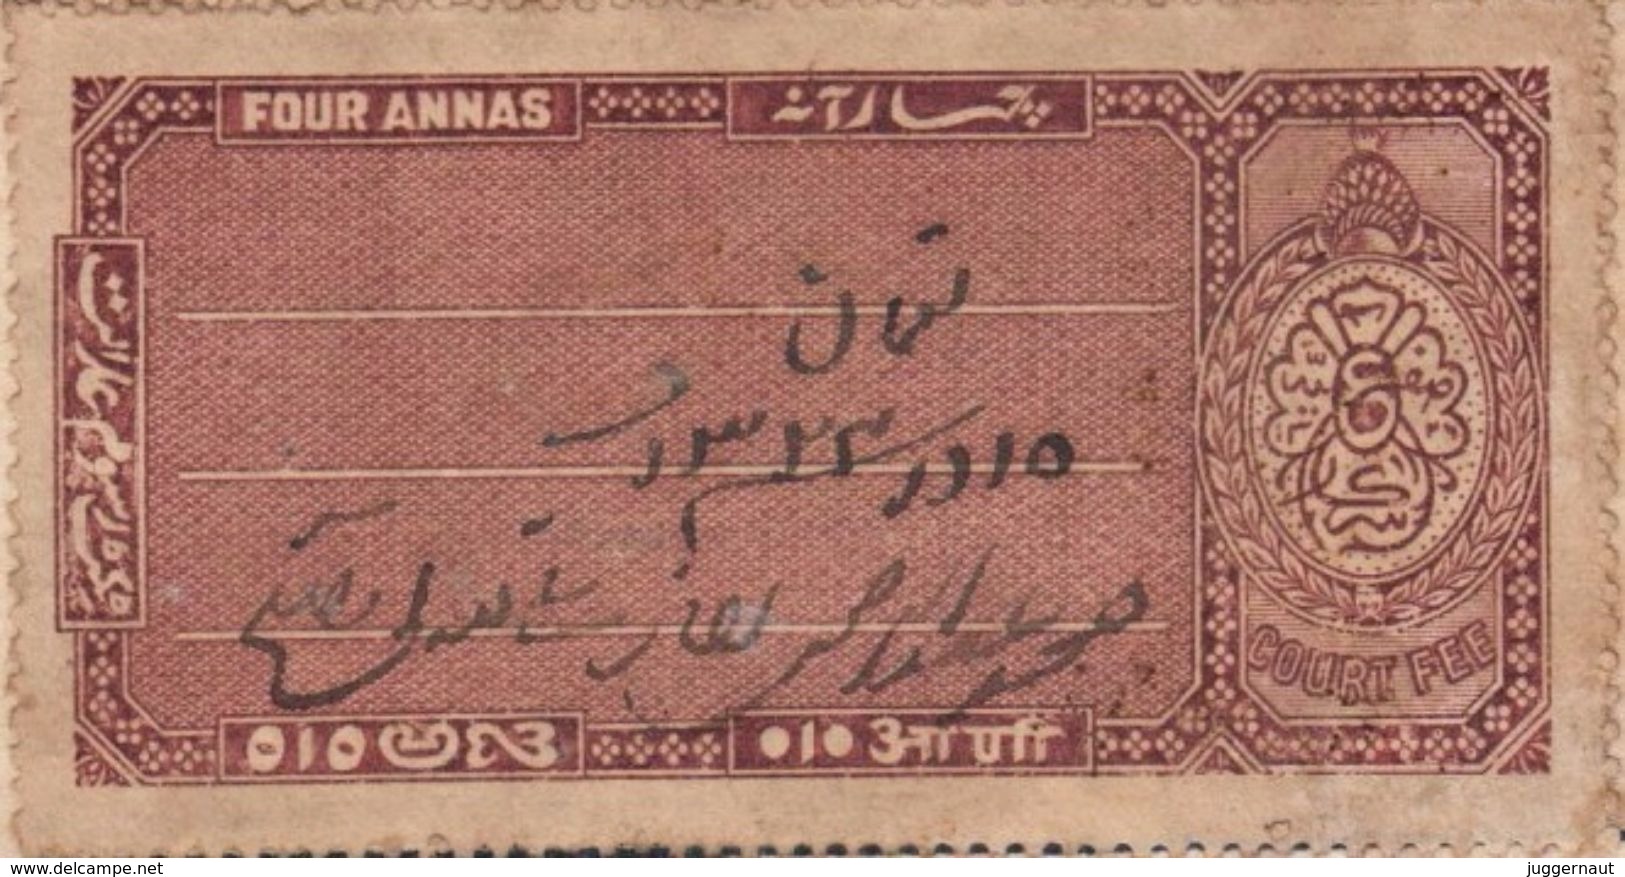 INDIA HYDERABAD PRINCELY STATE 4-ANNAS COURT FEE STAMP 1908 GOOD/USED - Hyderabad